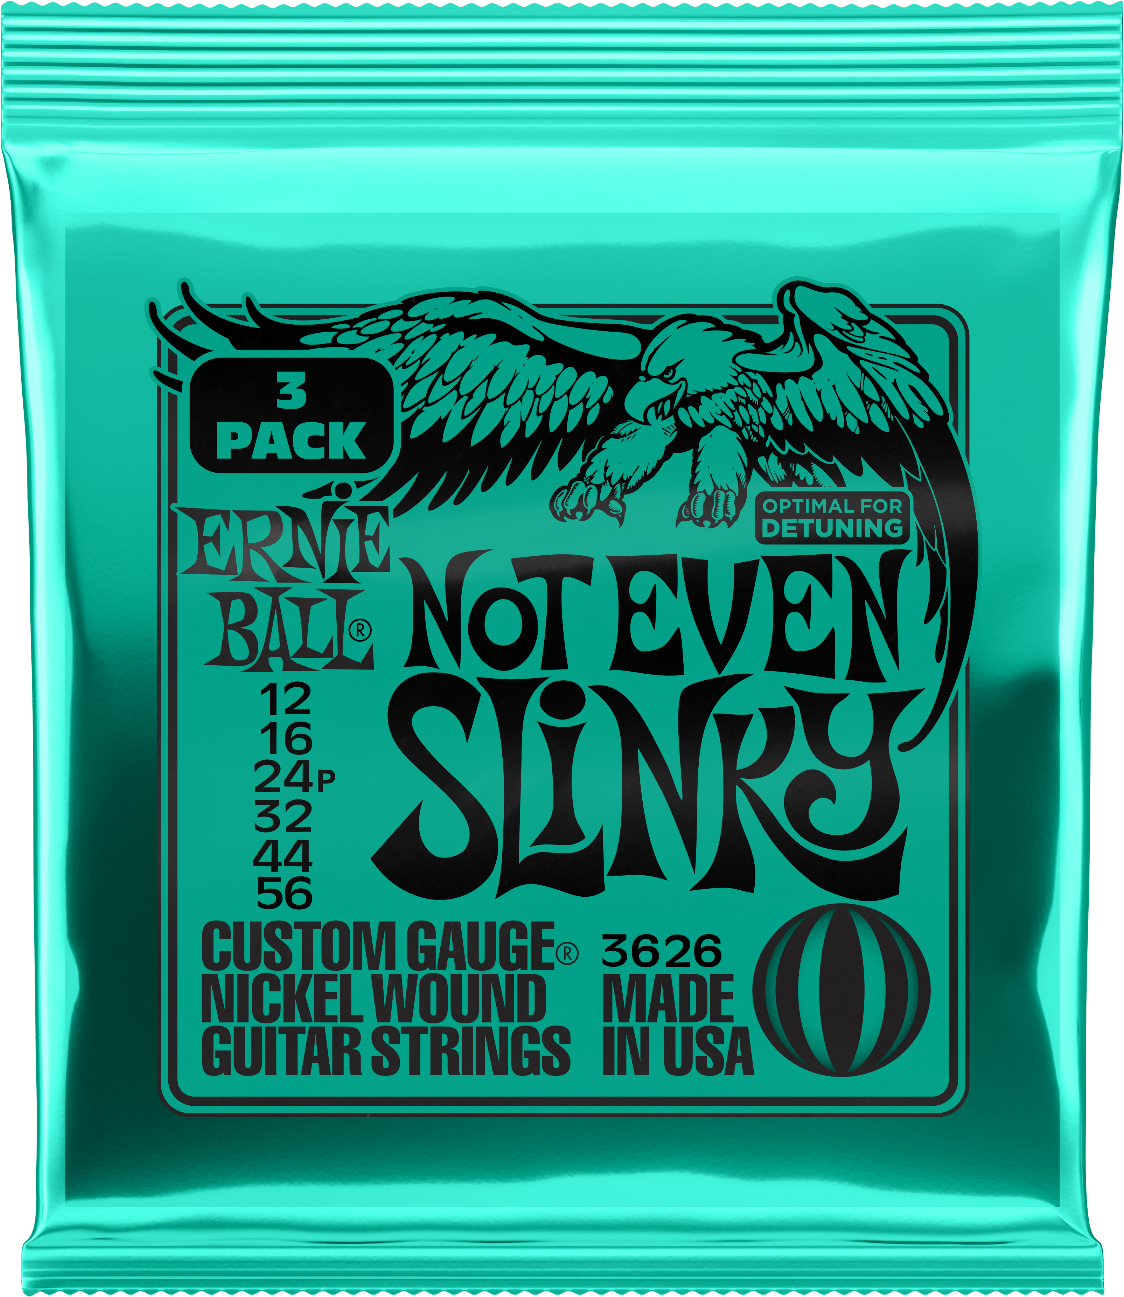 Ernie Ball Not Even Slinky Electric Guitar Strings 3 Pack - 12-56 - Joondalup Music Centre